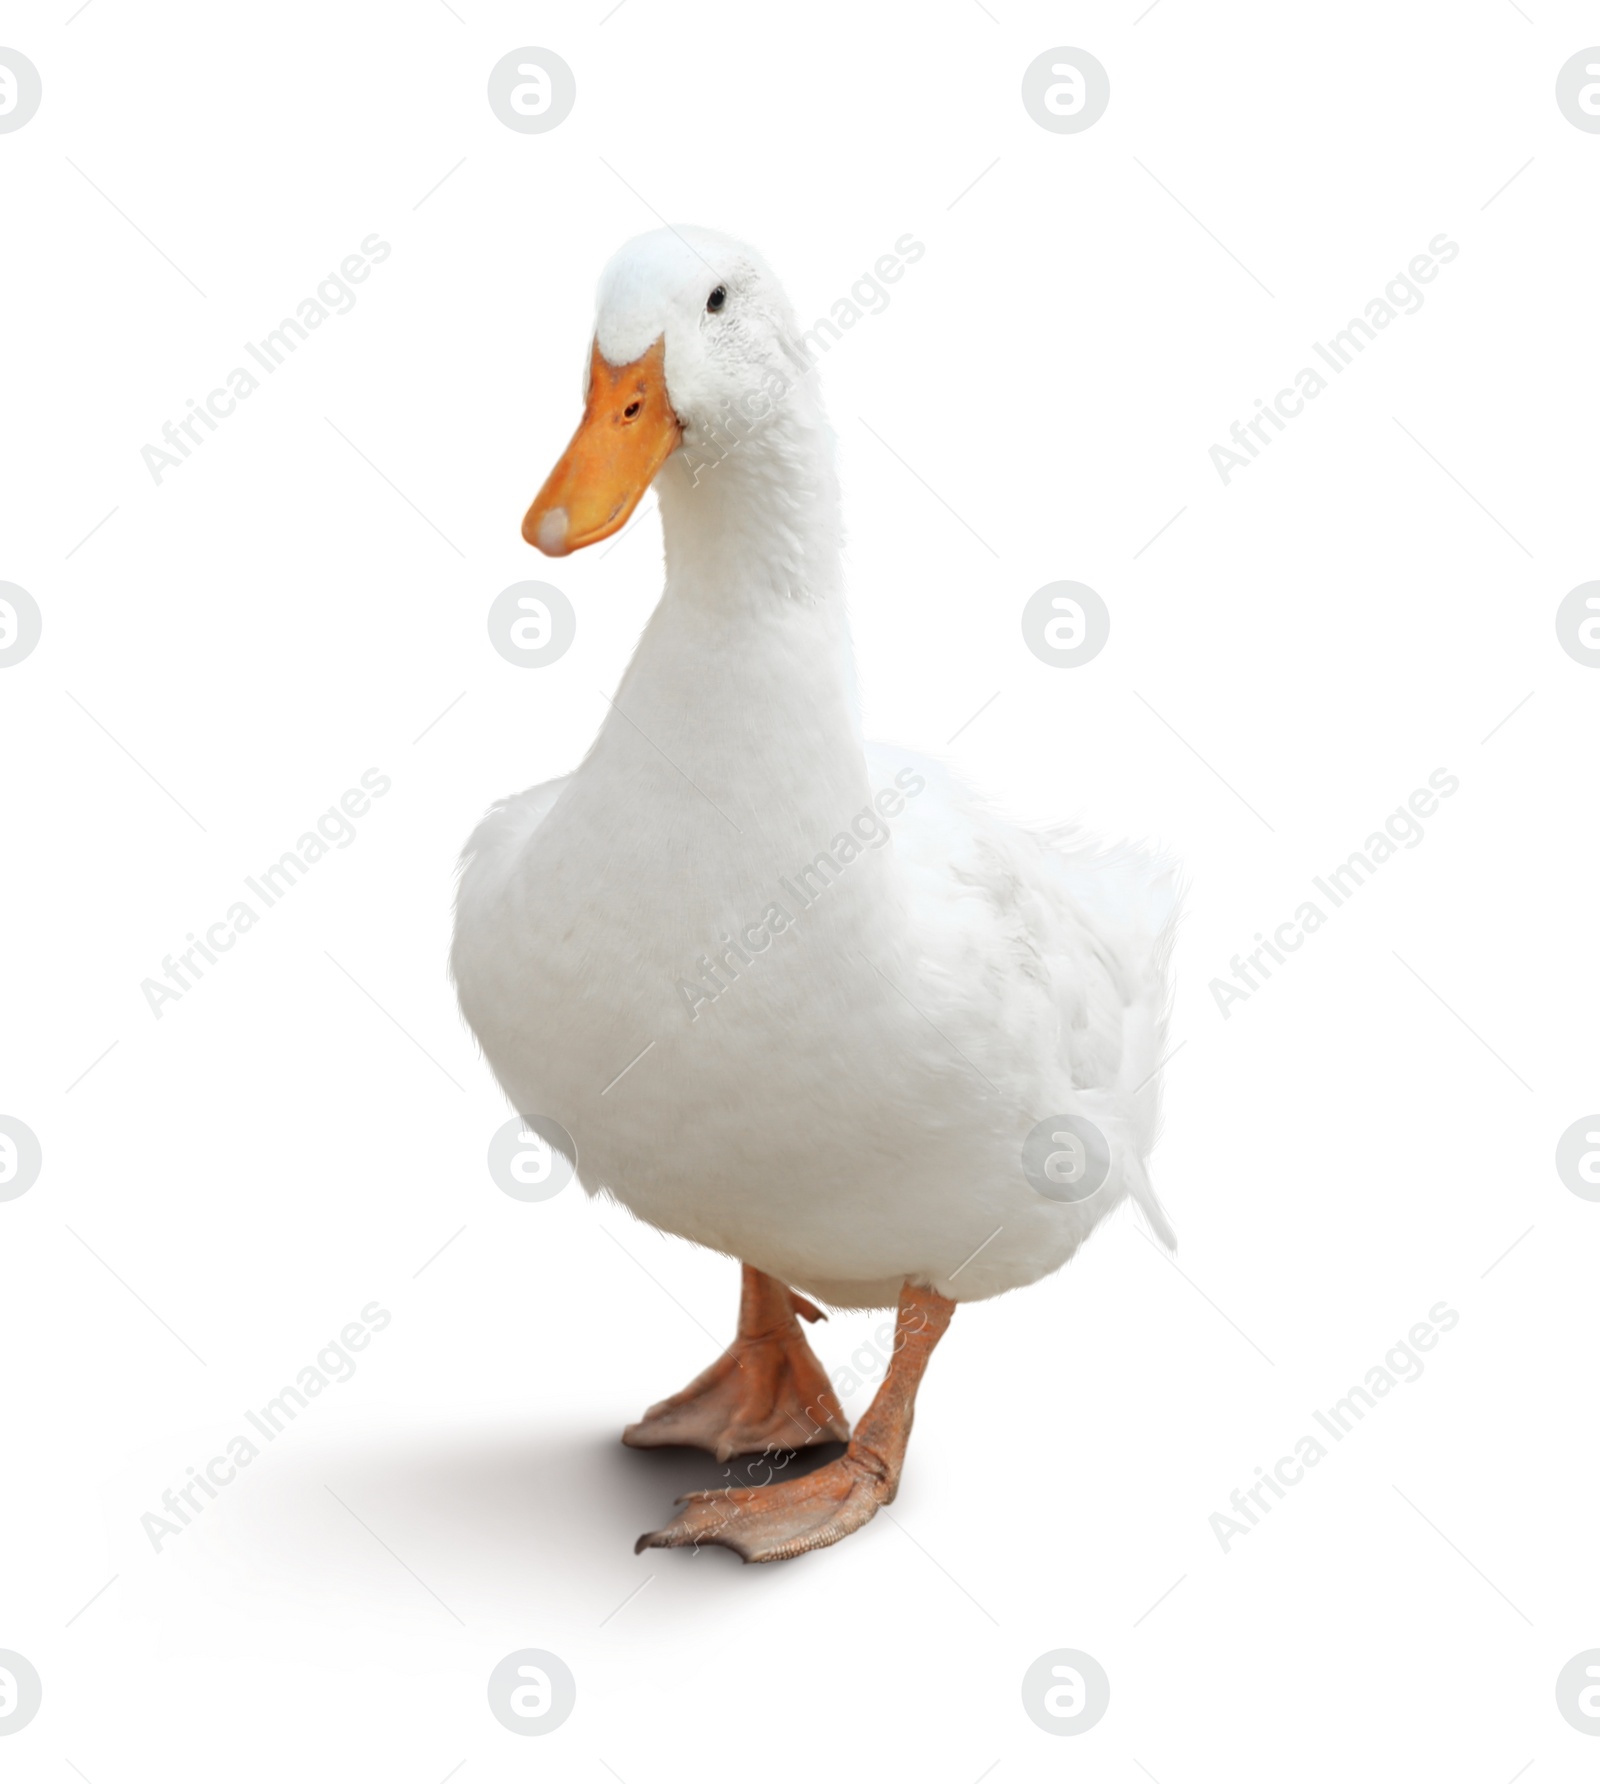 Image of Domestic duck isolated on white. Farm animal